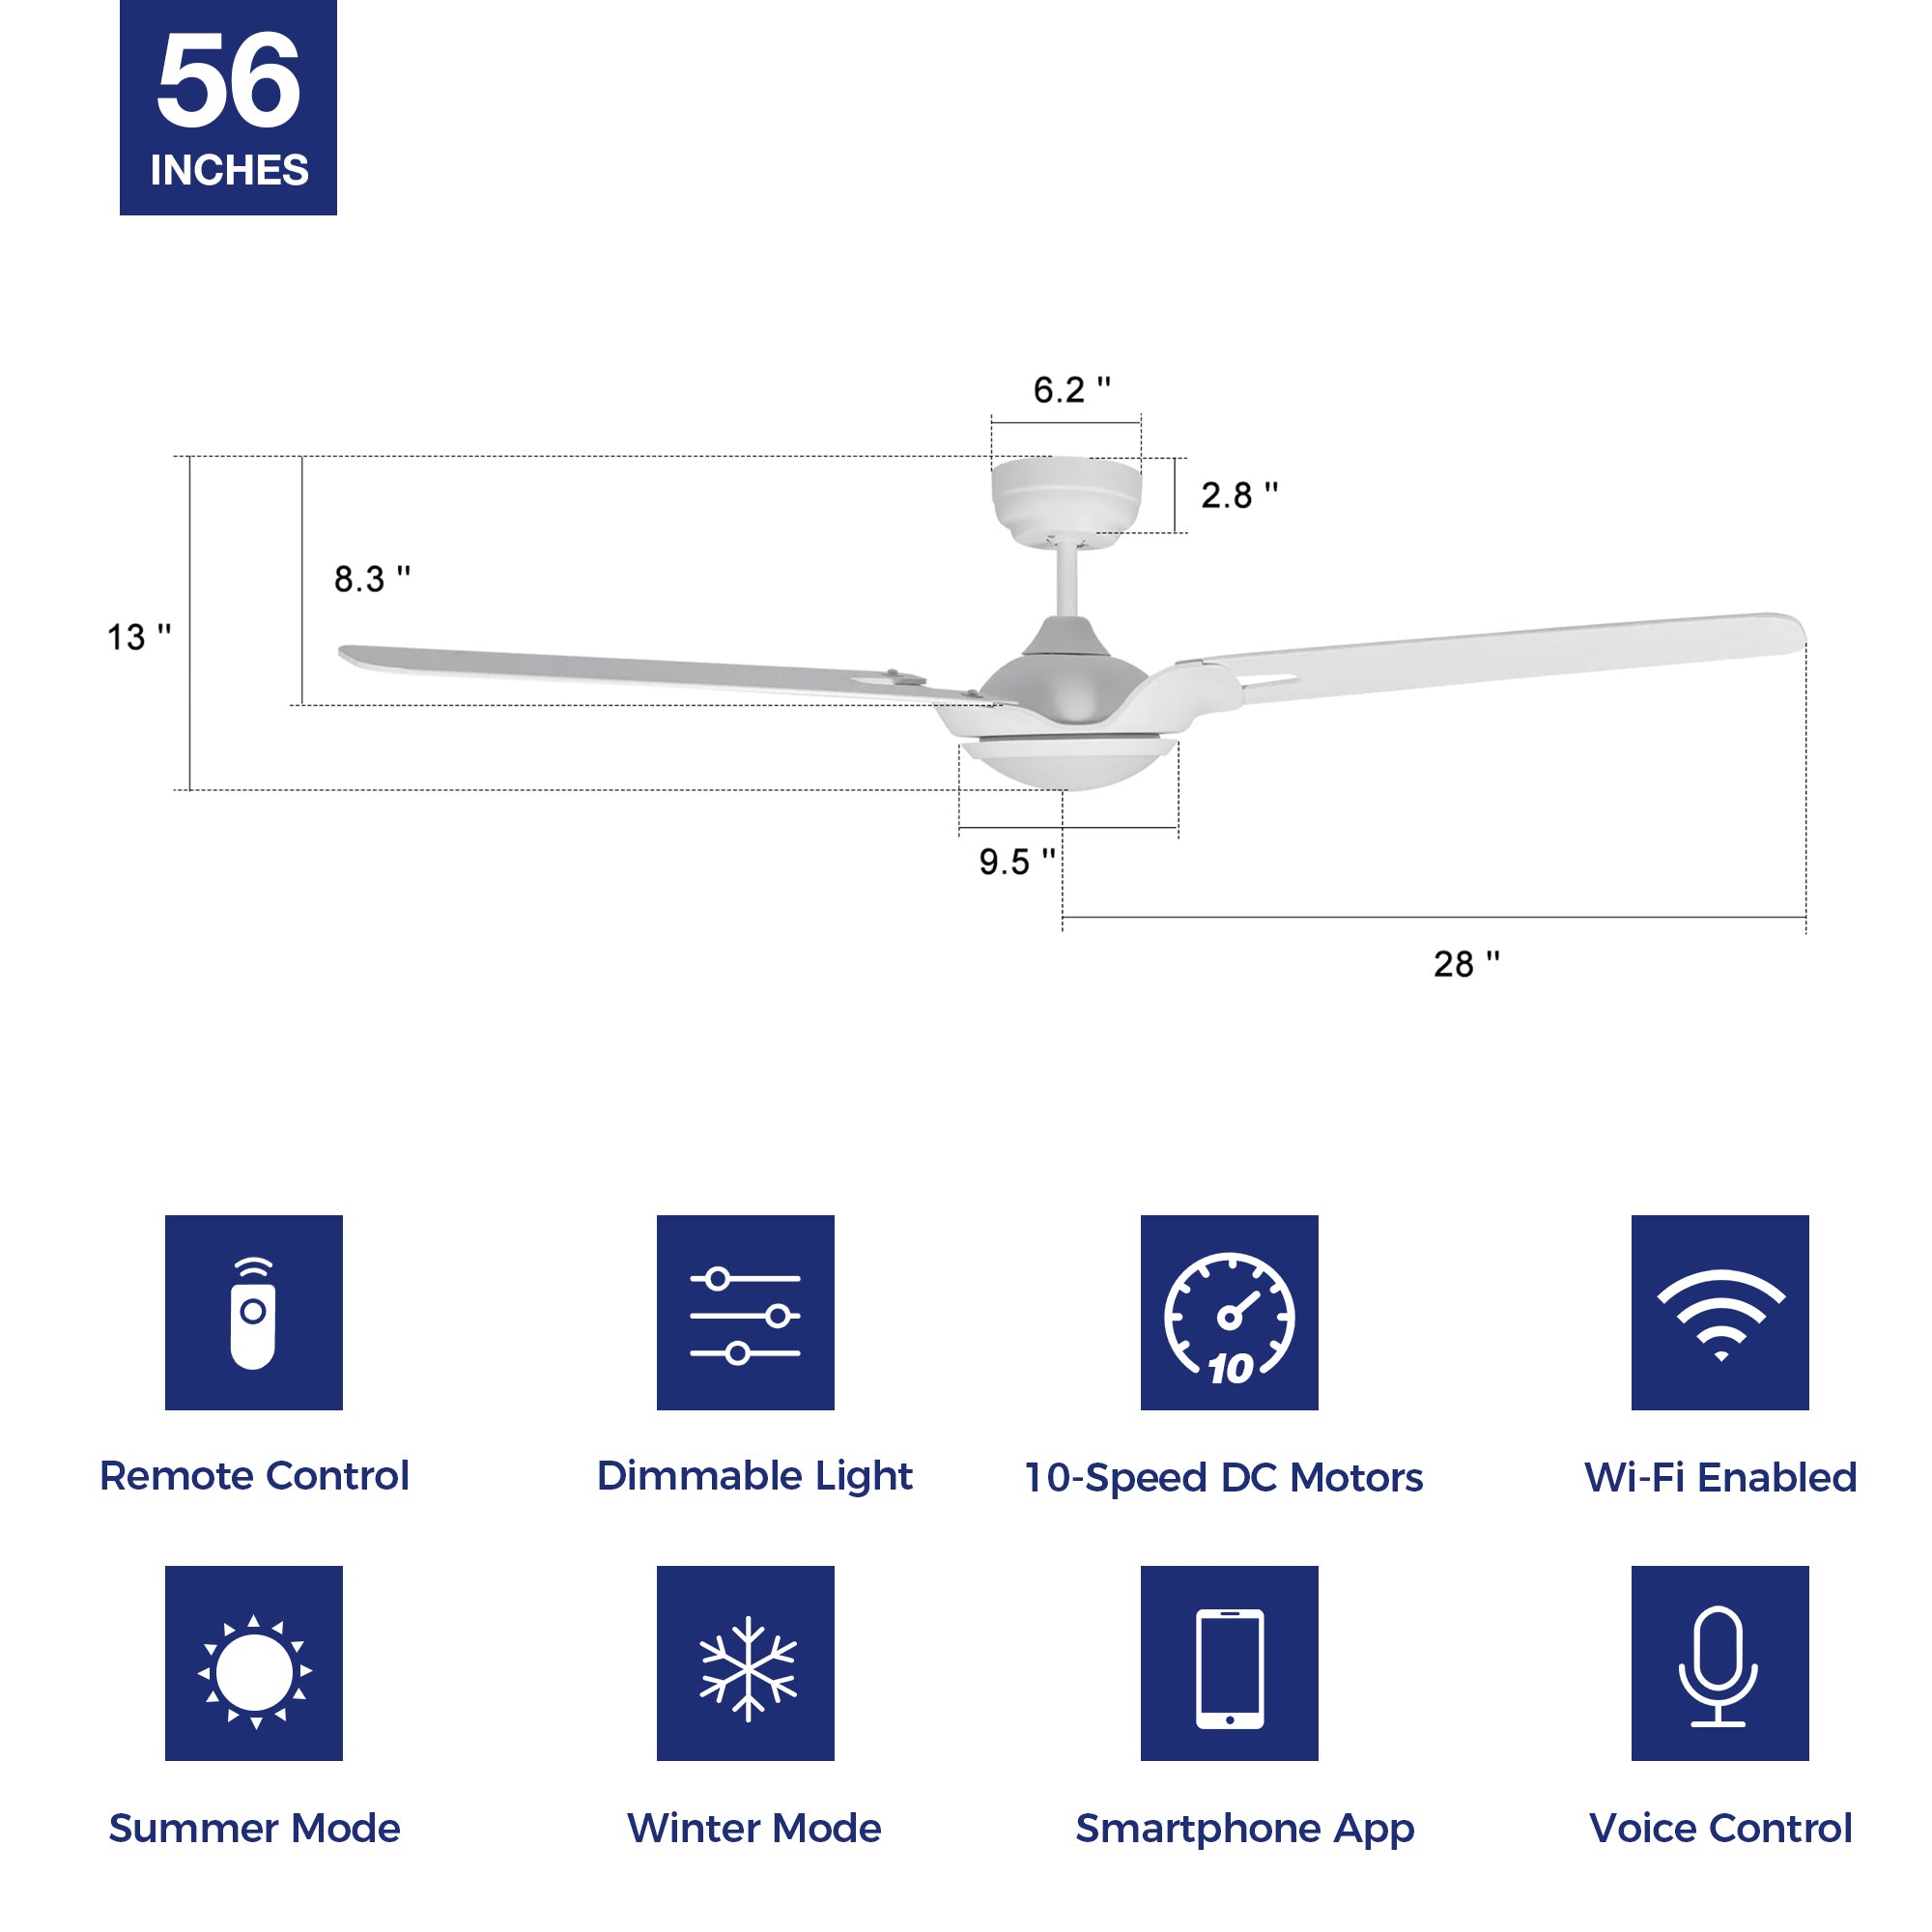 Innovator Outdoor 56&quot; Smart Ceiling Fan with LED Light Kit-White case with white blades. The fan features Remote control, Wi-Fi apps, and Voice control technology (compatible with Amazon Alexa and Google Home Assistant ) to set fan preferences. Equipped with 1962-lumen dimmable LED lights and a 10-speed DC Motor (5800CFM airflow output), it brings you cool and bright. 